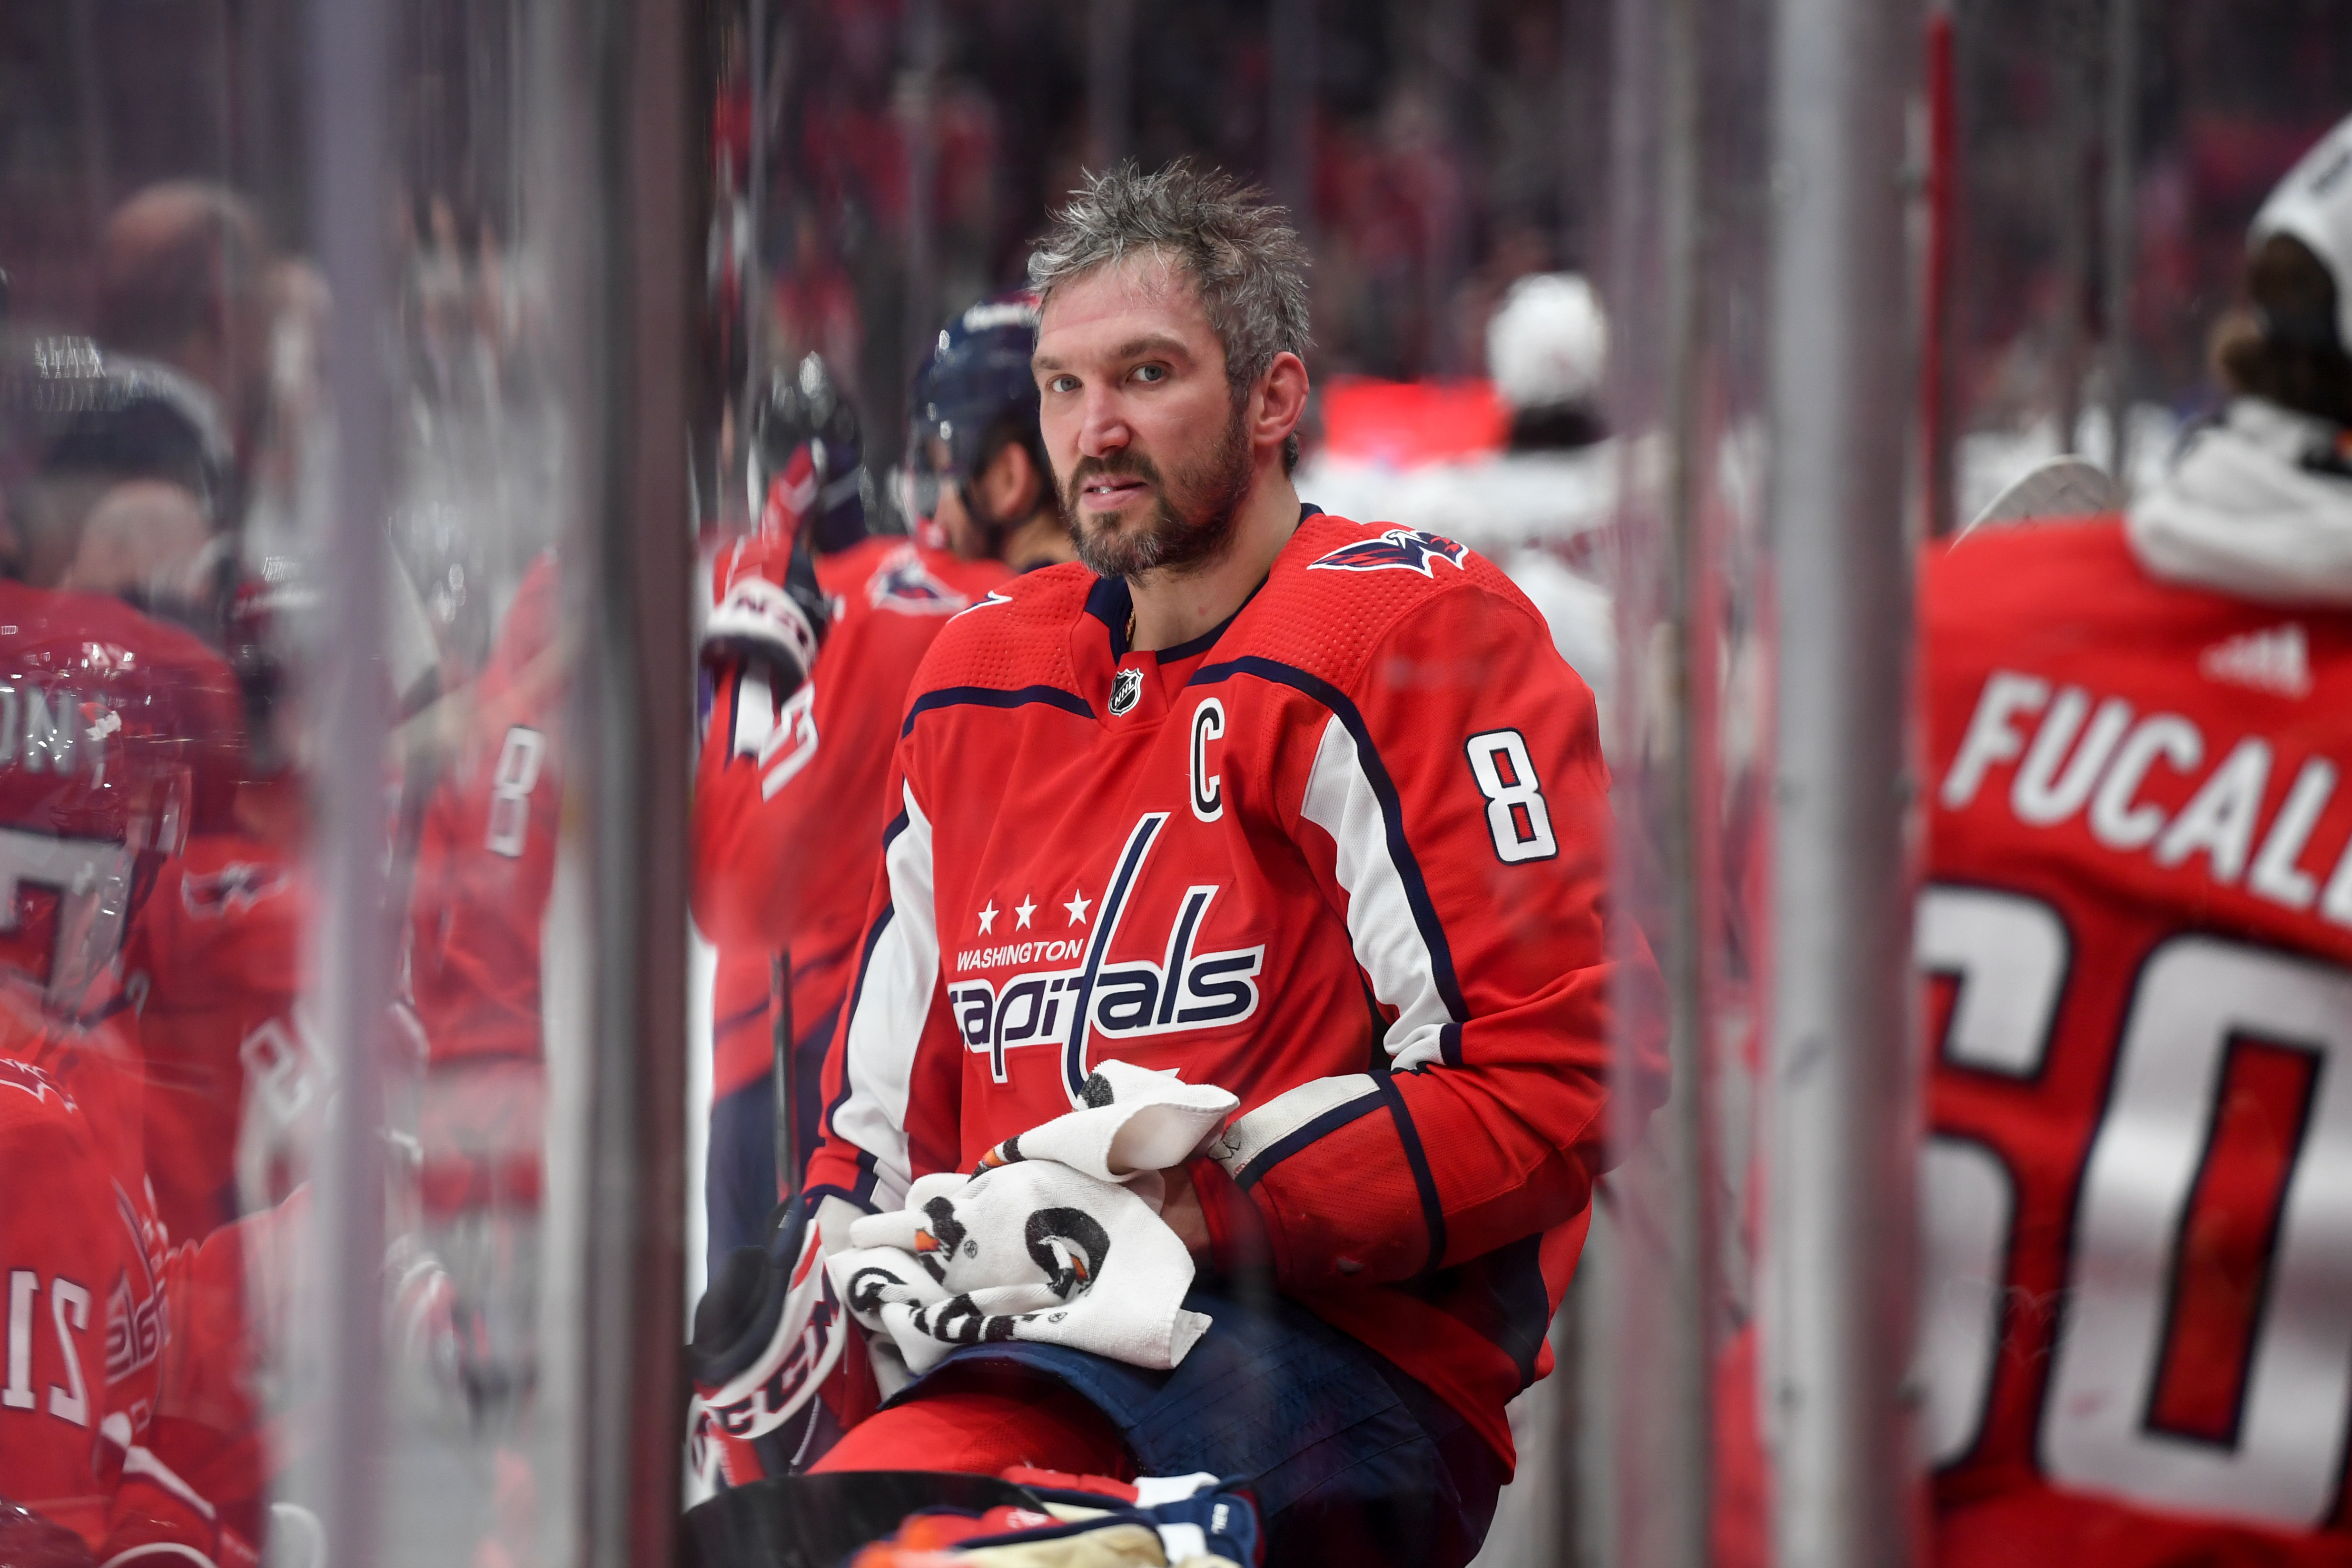 Alex Ovechkin: Every Time I Play For Russia I Play In The Paint